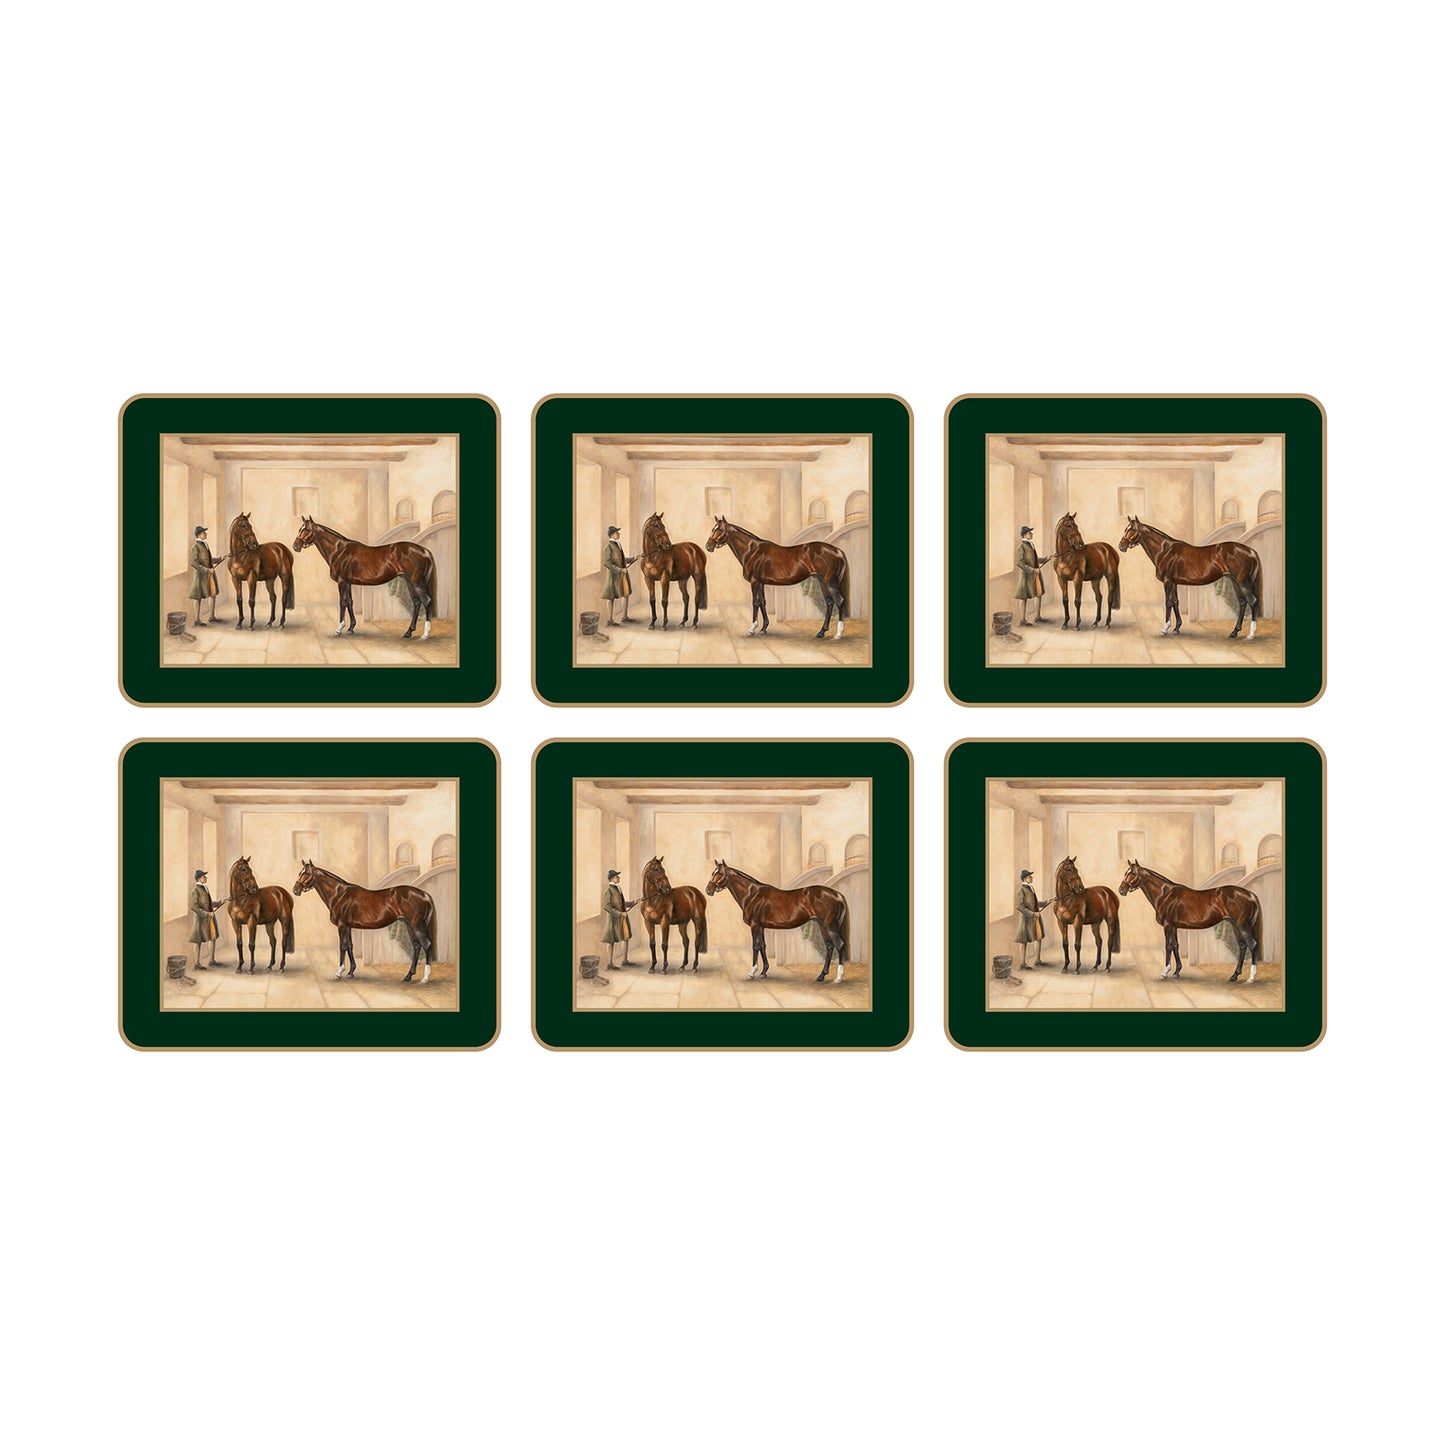 Traditional Coasters Stable Scene